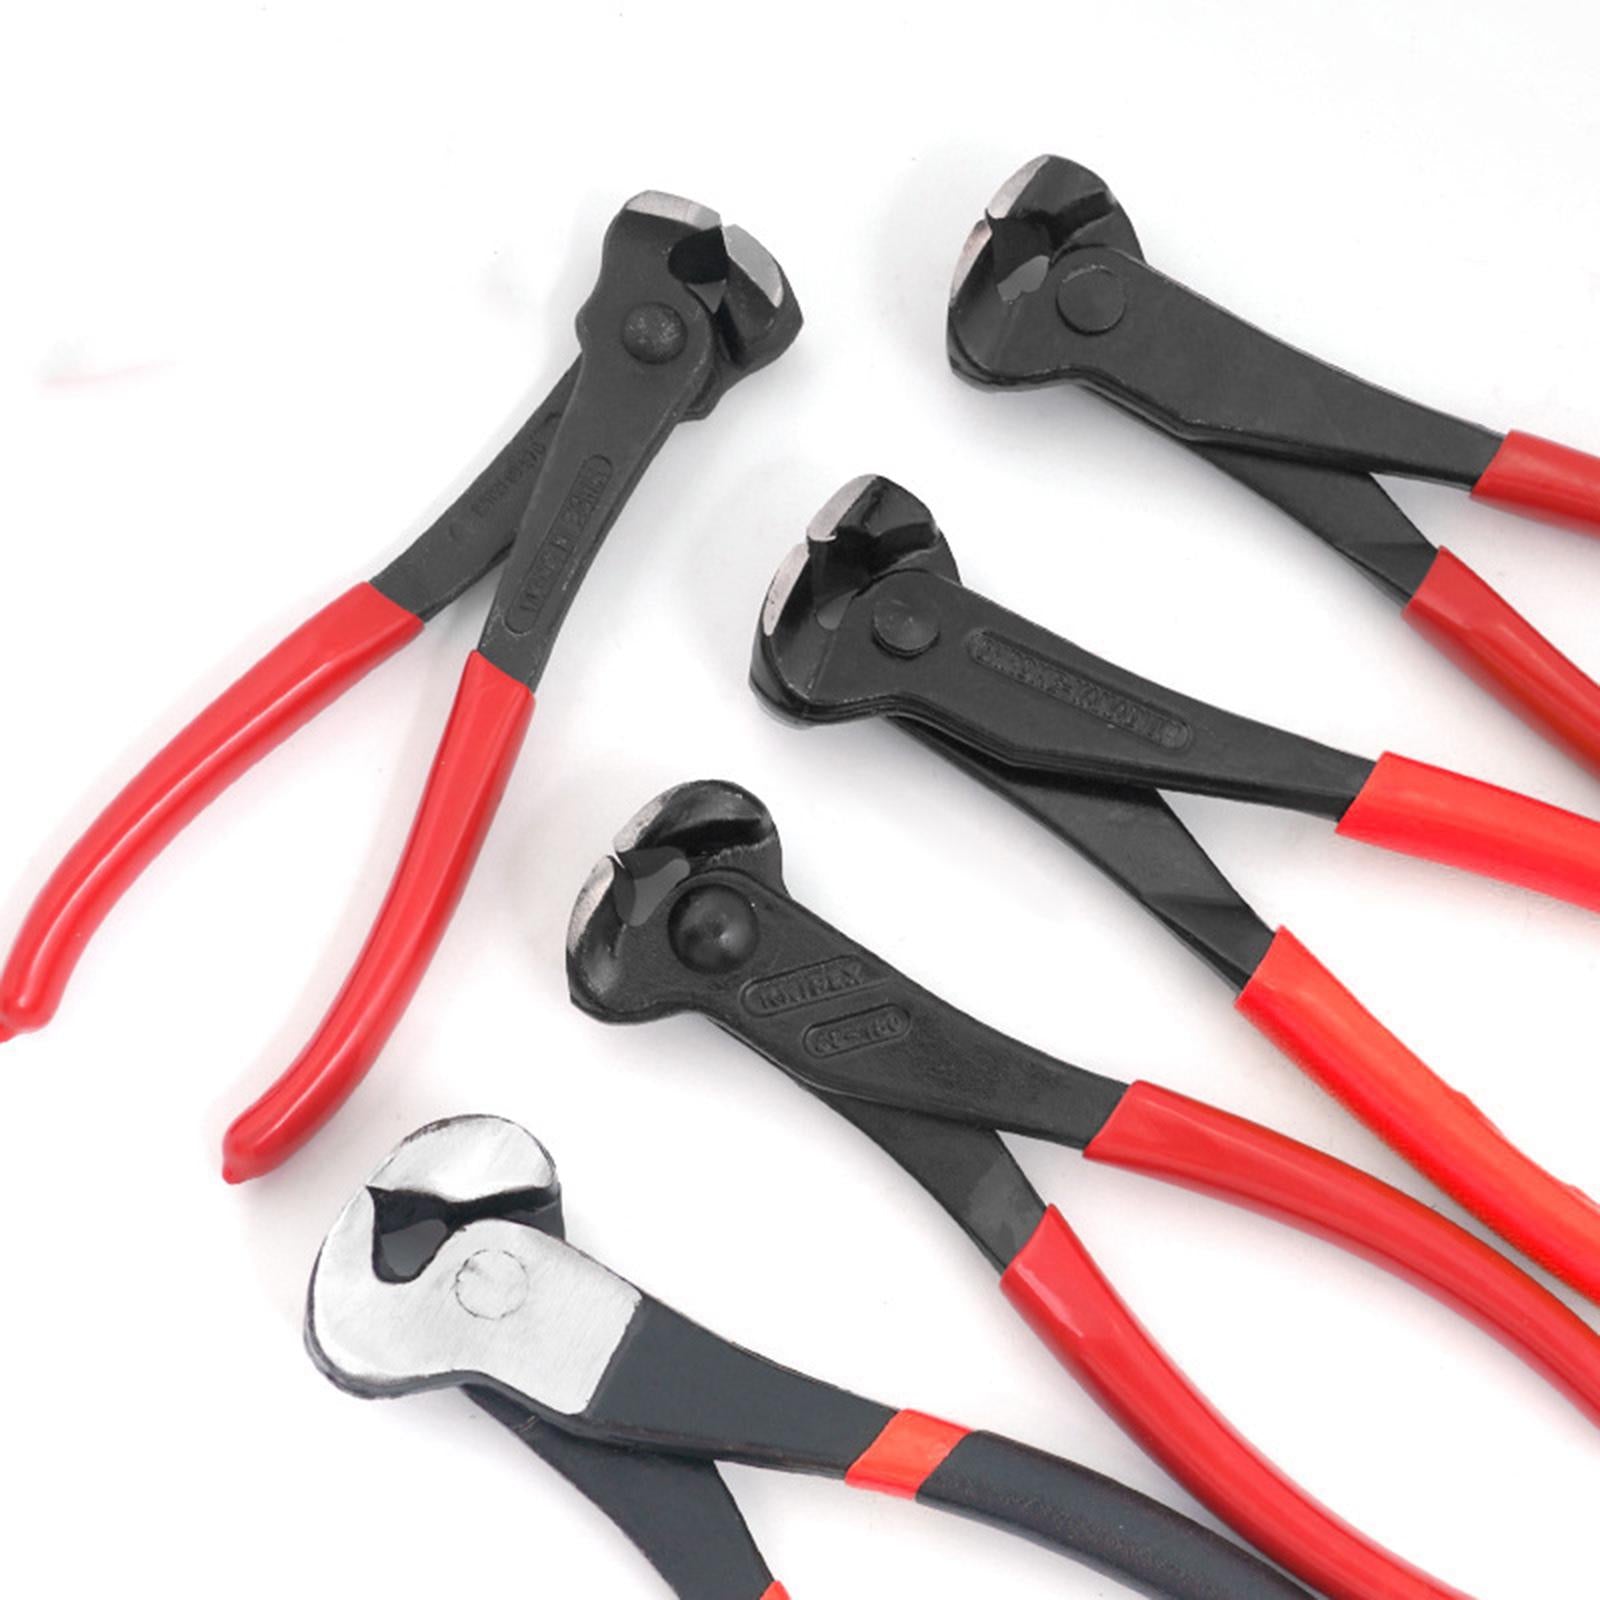 45 Steel Nail Puller Cutting Pliers Accessories Tool Repair for Change Heels 7inch